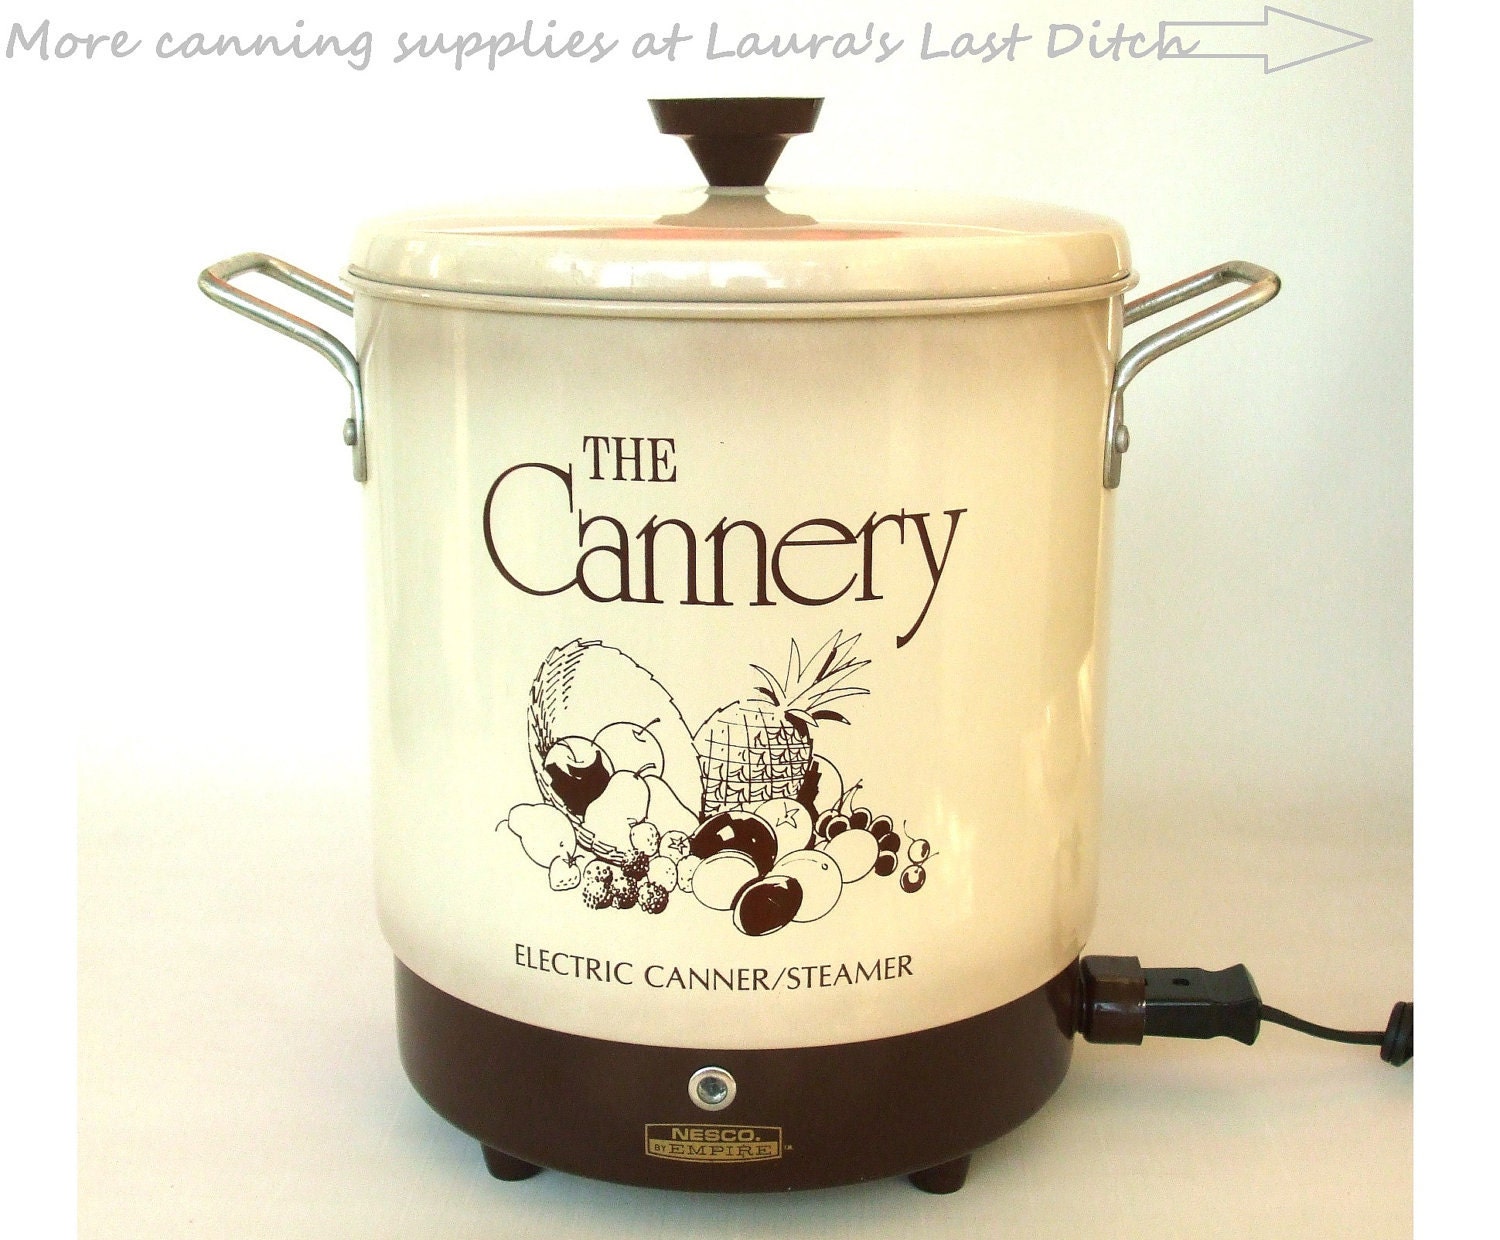 Electric Water Bath Canner Nesco Cannery Canning Supplies -  Denmark